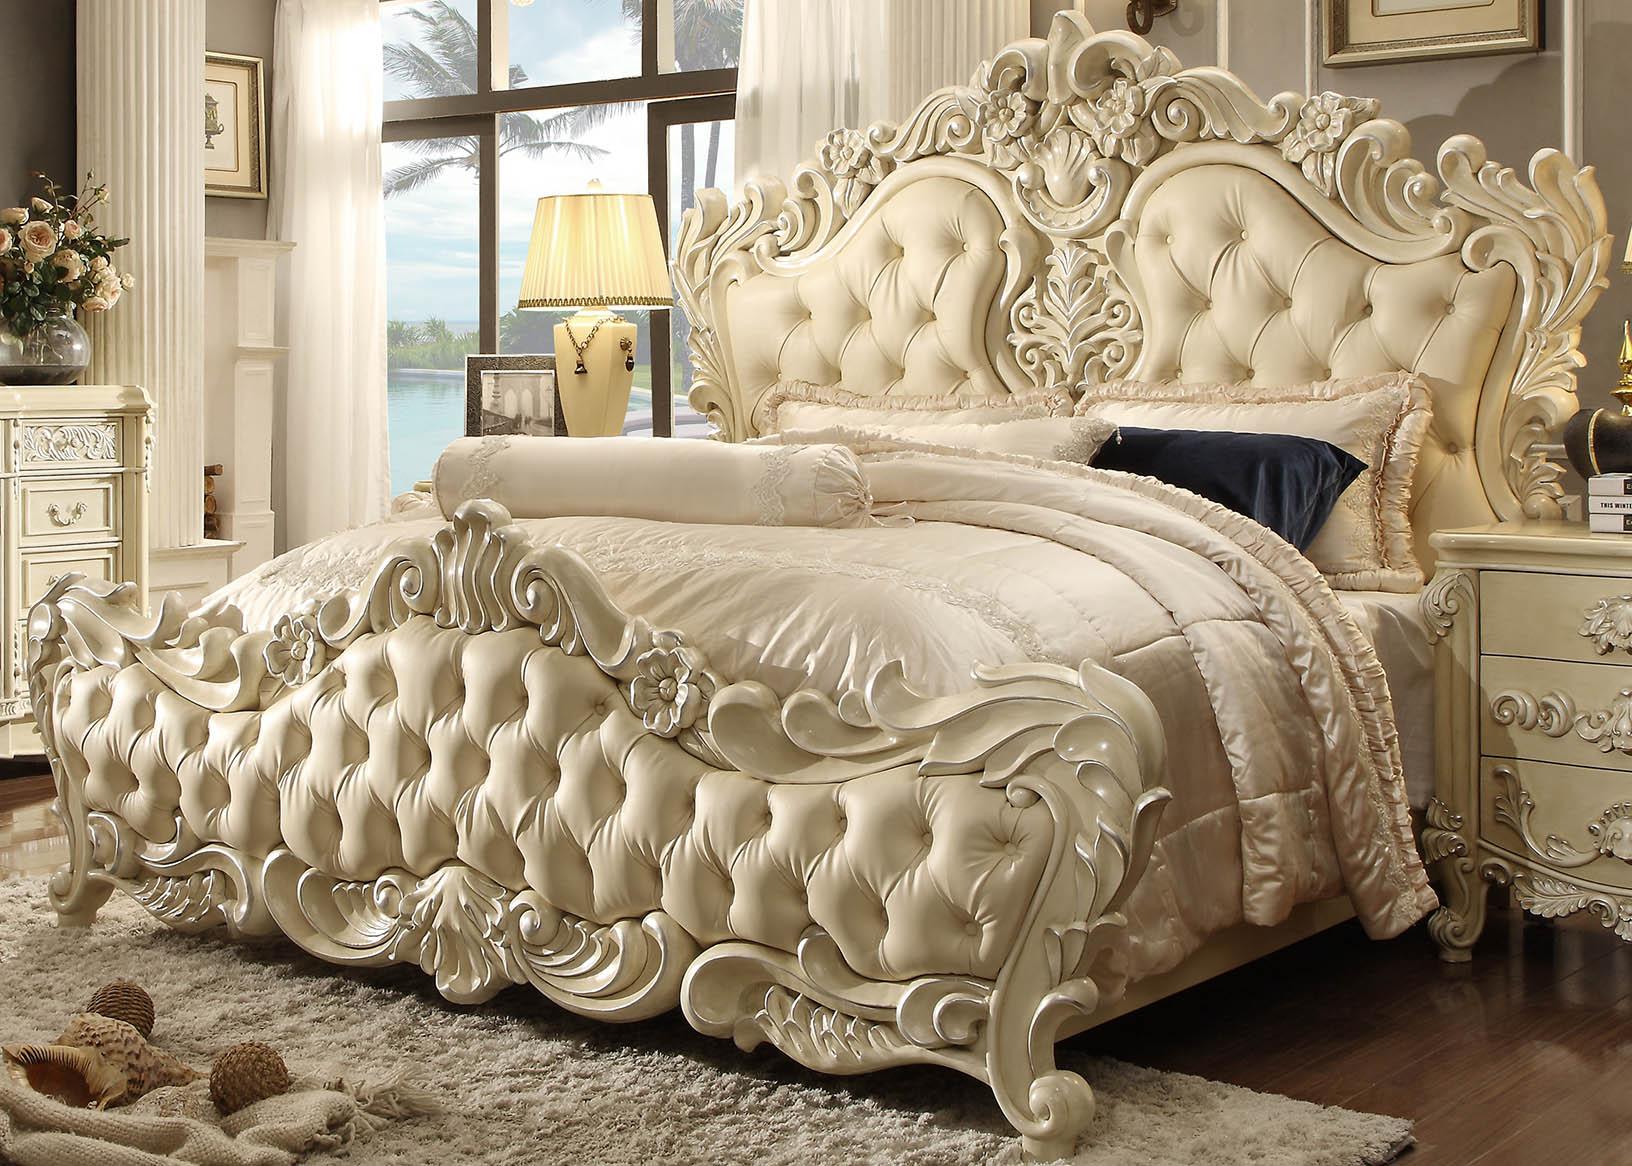 Traditional Panel Bed HD-5800 – CK BED HD-CK5800 in Pearl, Cream Leather